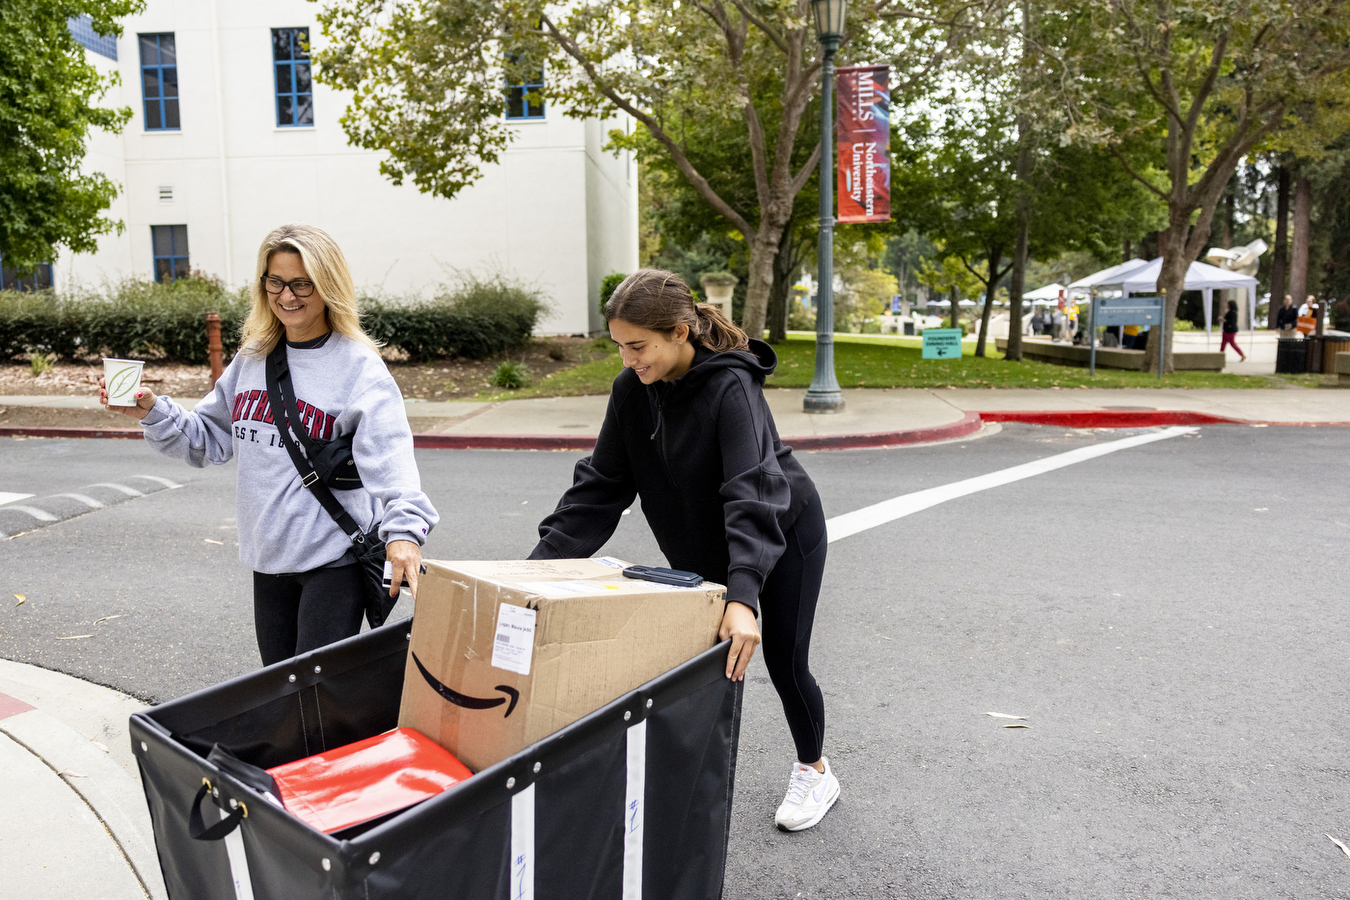 A student is assisted by her mother as she wheels a moving bin full of personal items across a street